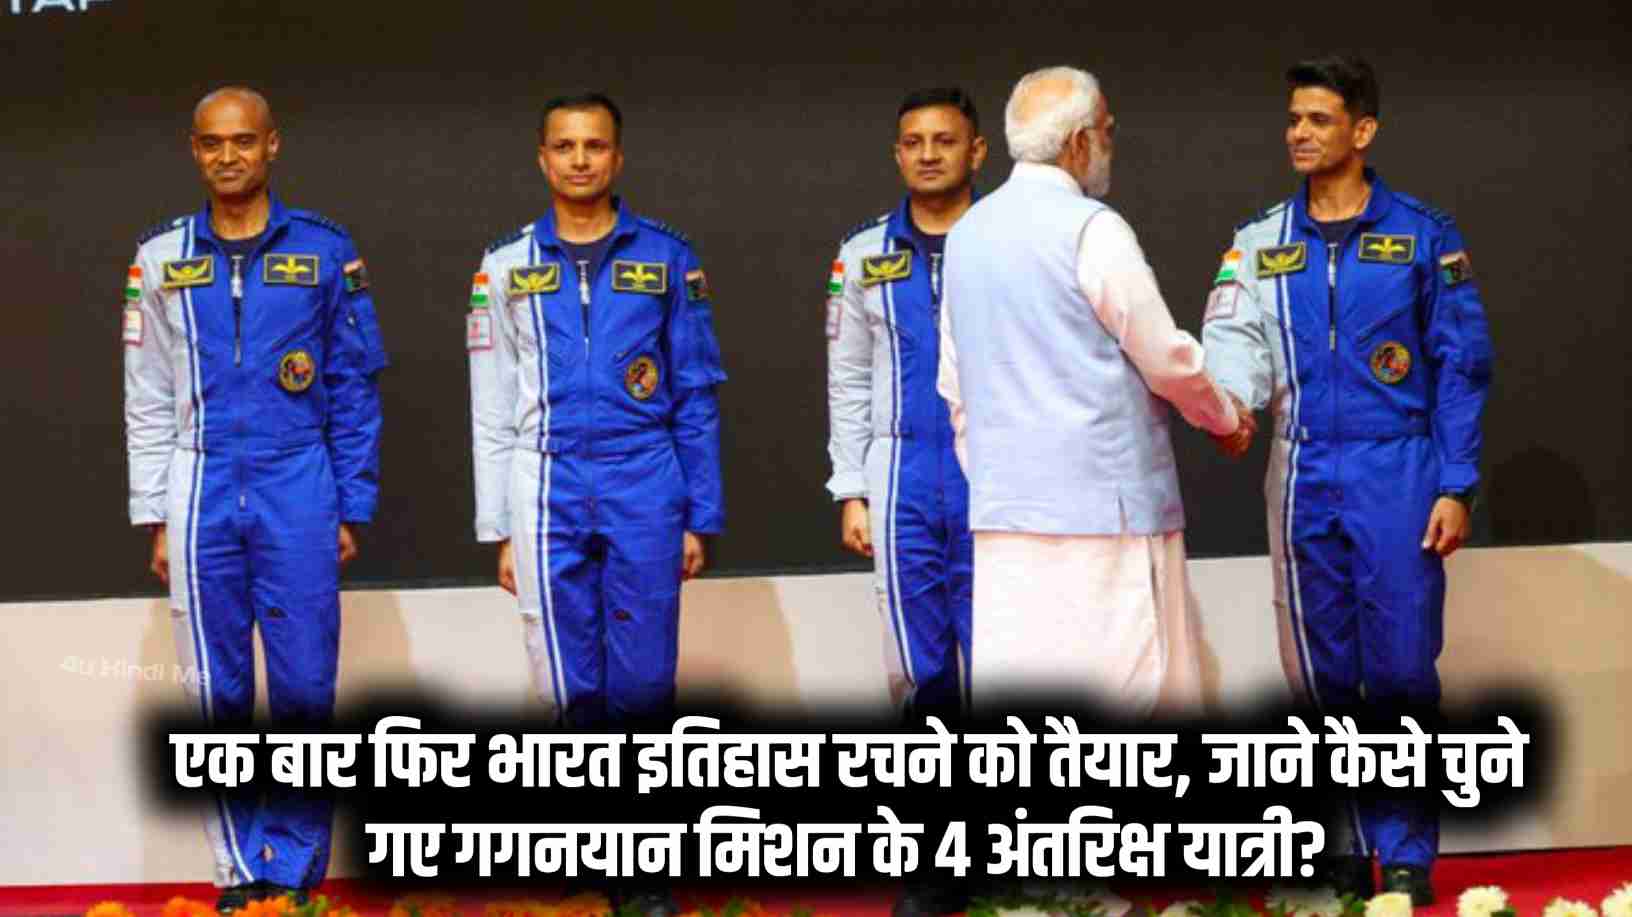 Once again India is ready to create history, know how 4 astronauts of Gaganyaan mission were selected